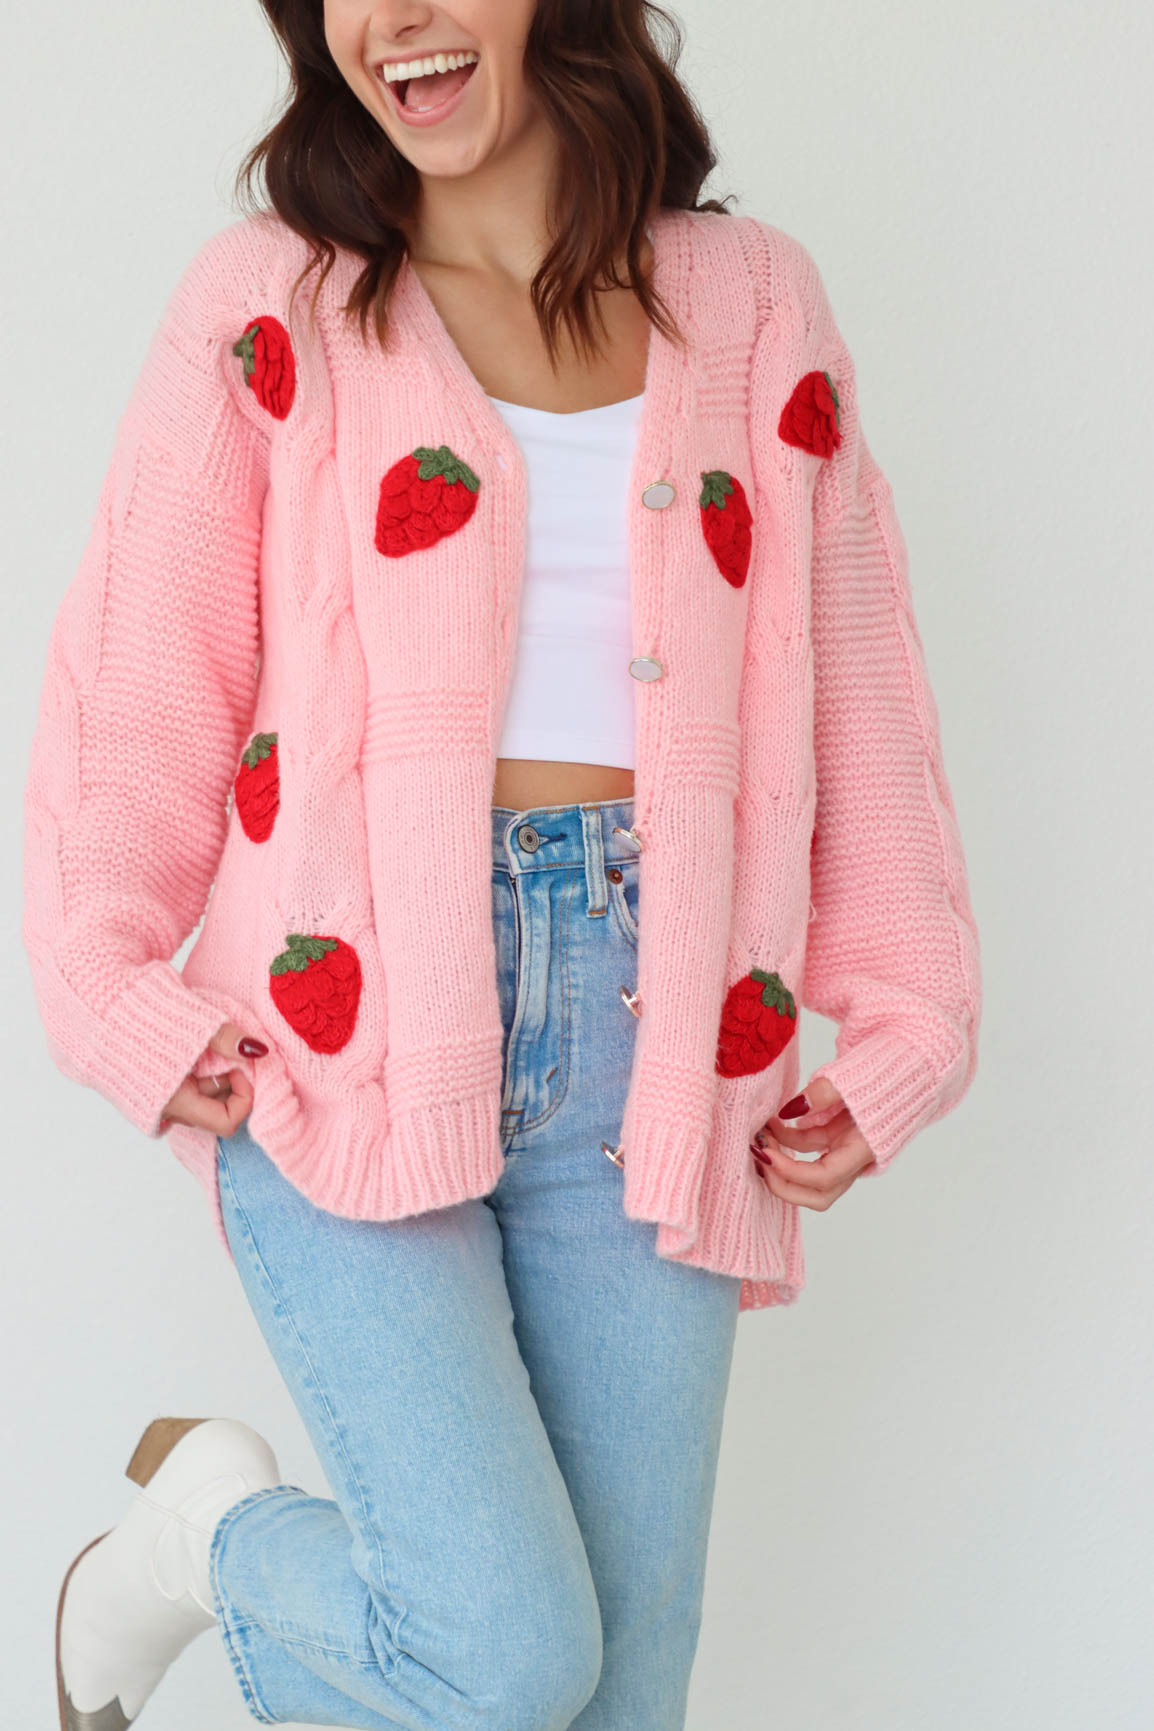 girl wearing pink knit cardigan sweater with red strawberry crochet detailing